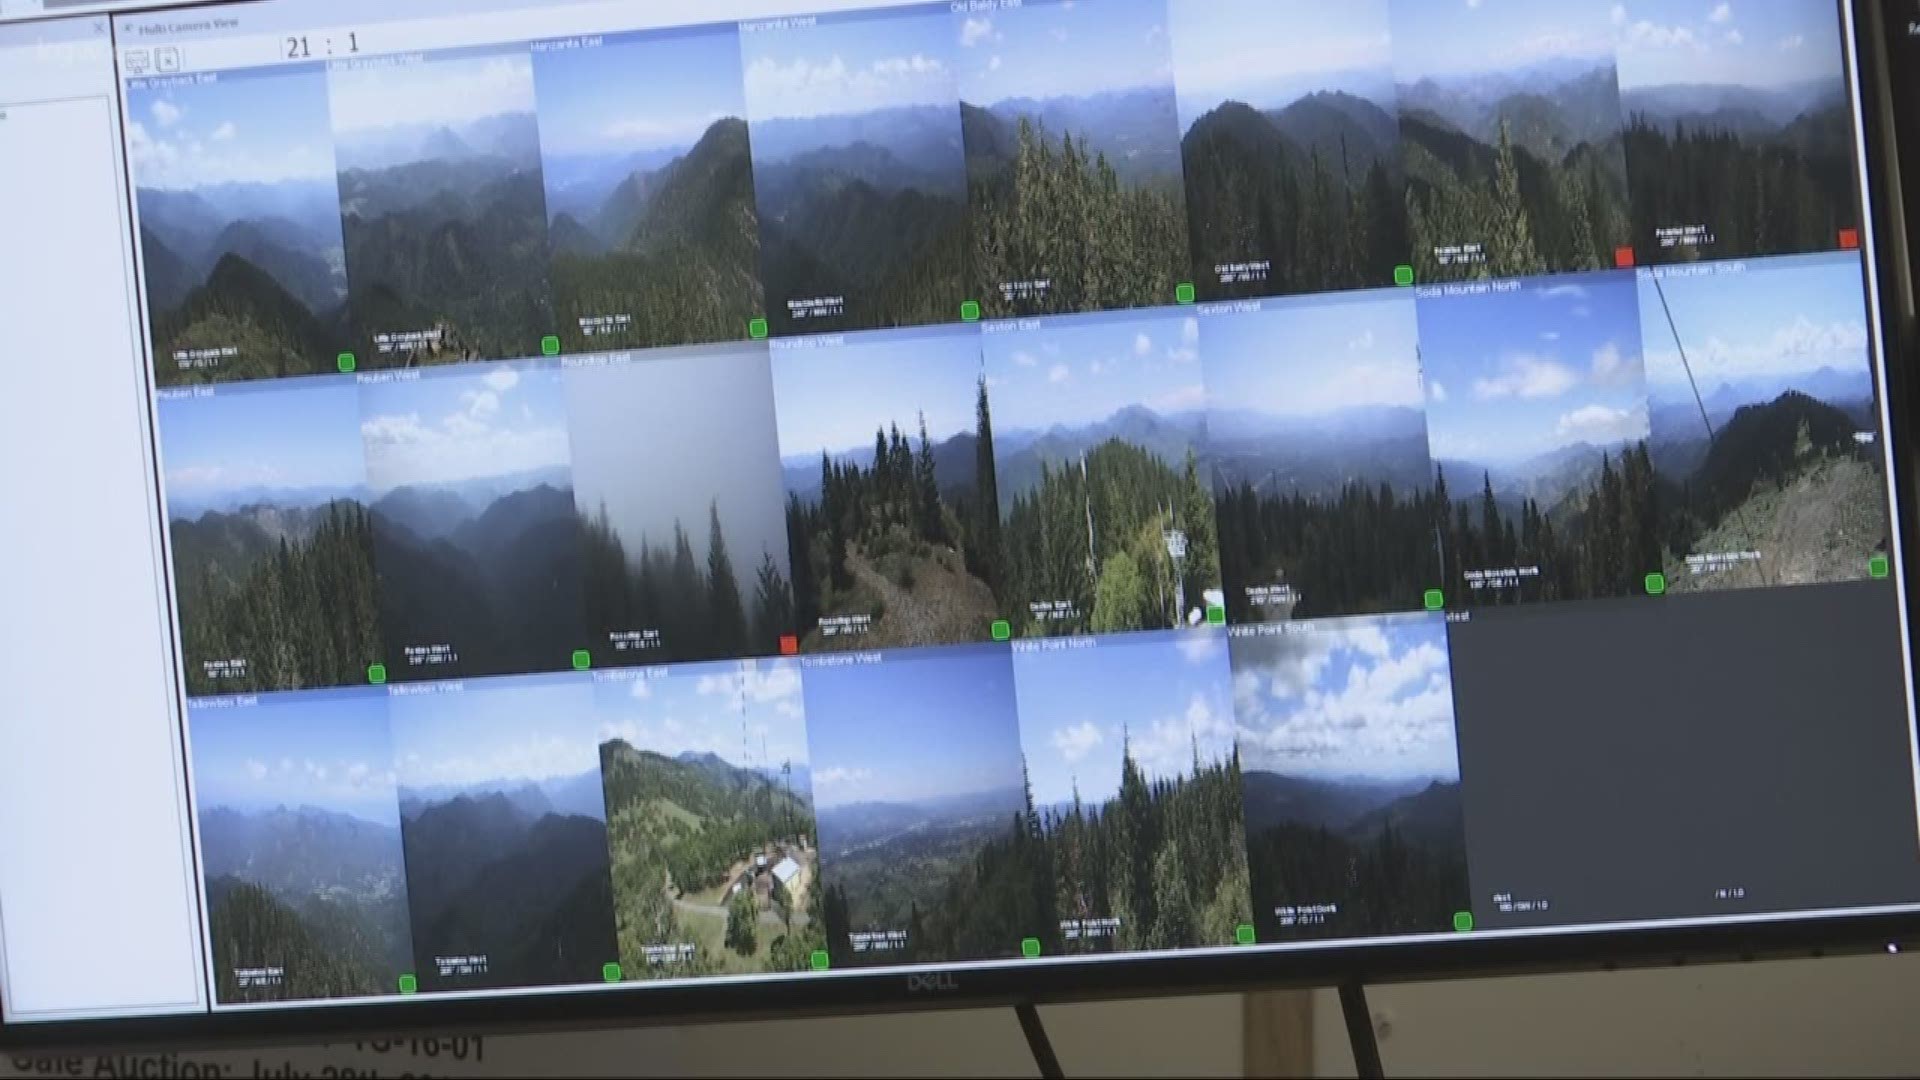 Oregon Department of Forestry has new equipment to detect fires early